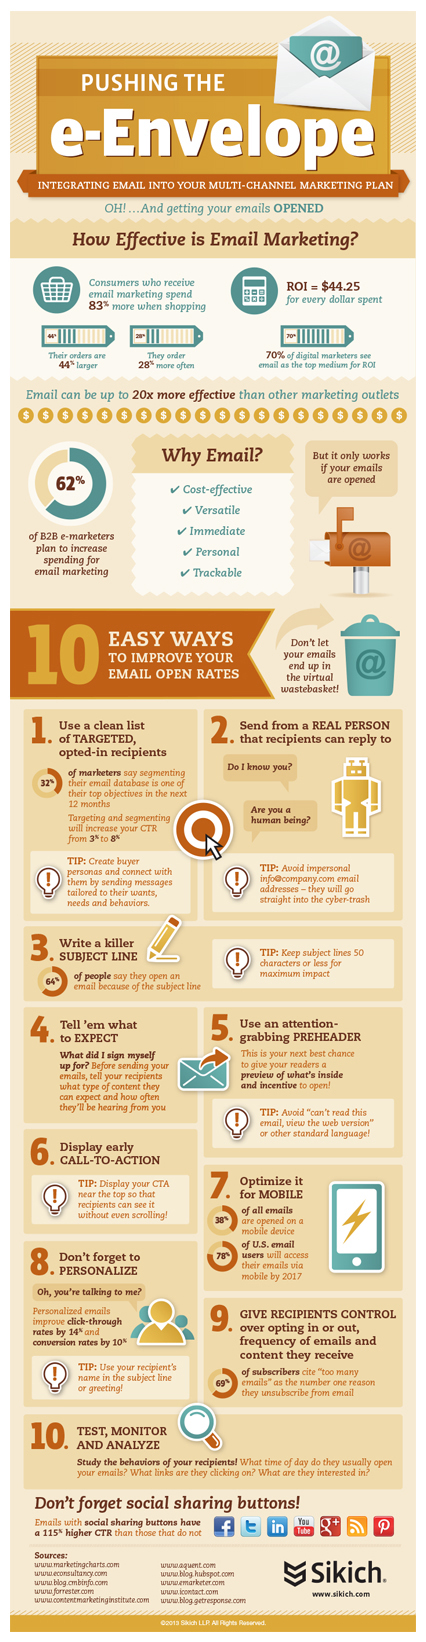 10 Easy Ways to Improve Email Open Rates